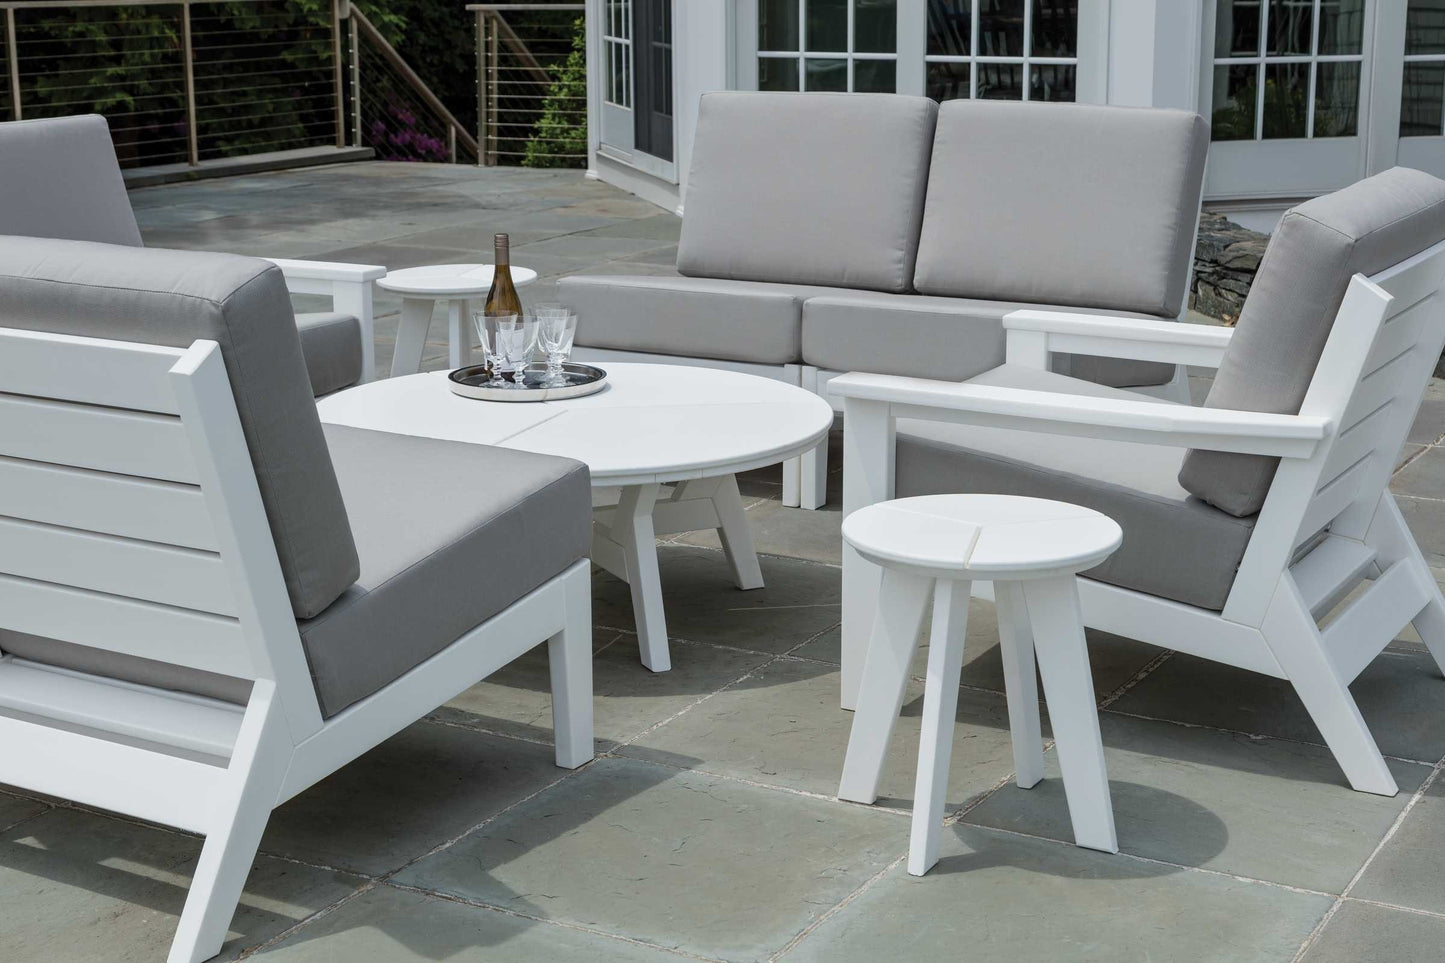 Dex Collection 4 Piece Outdoor Chat Set by Seaside Casual